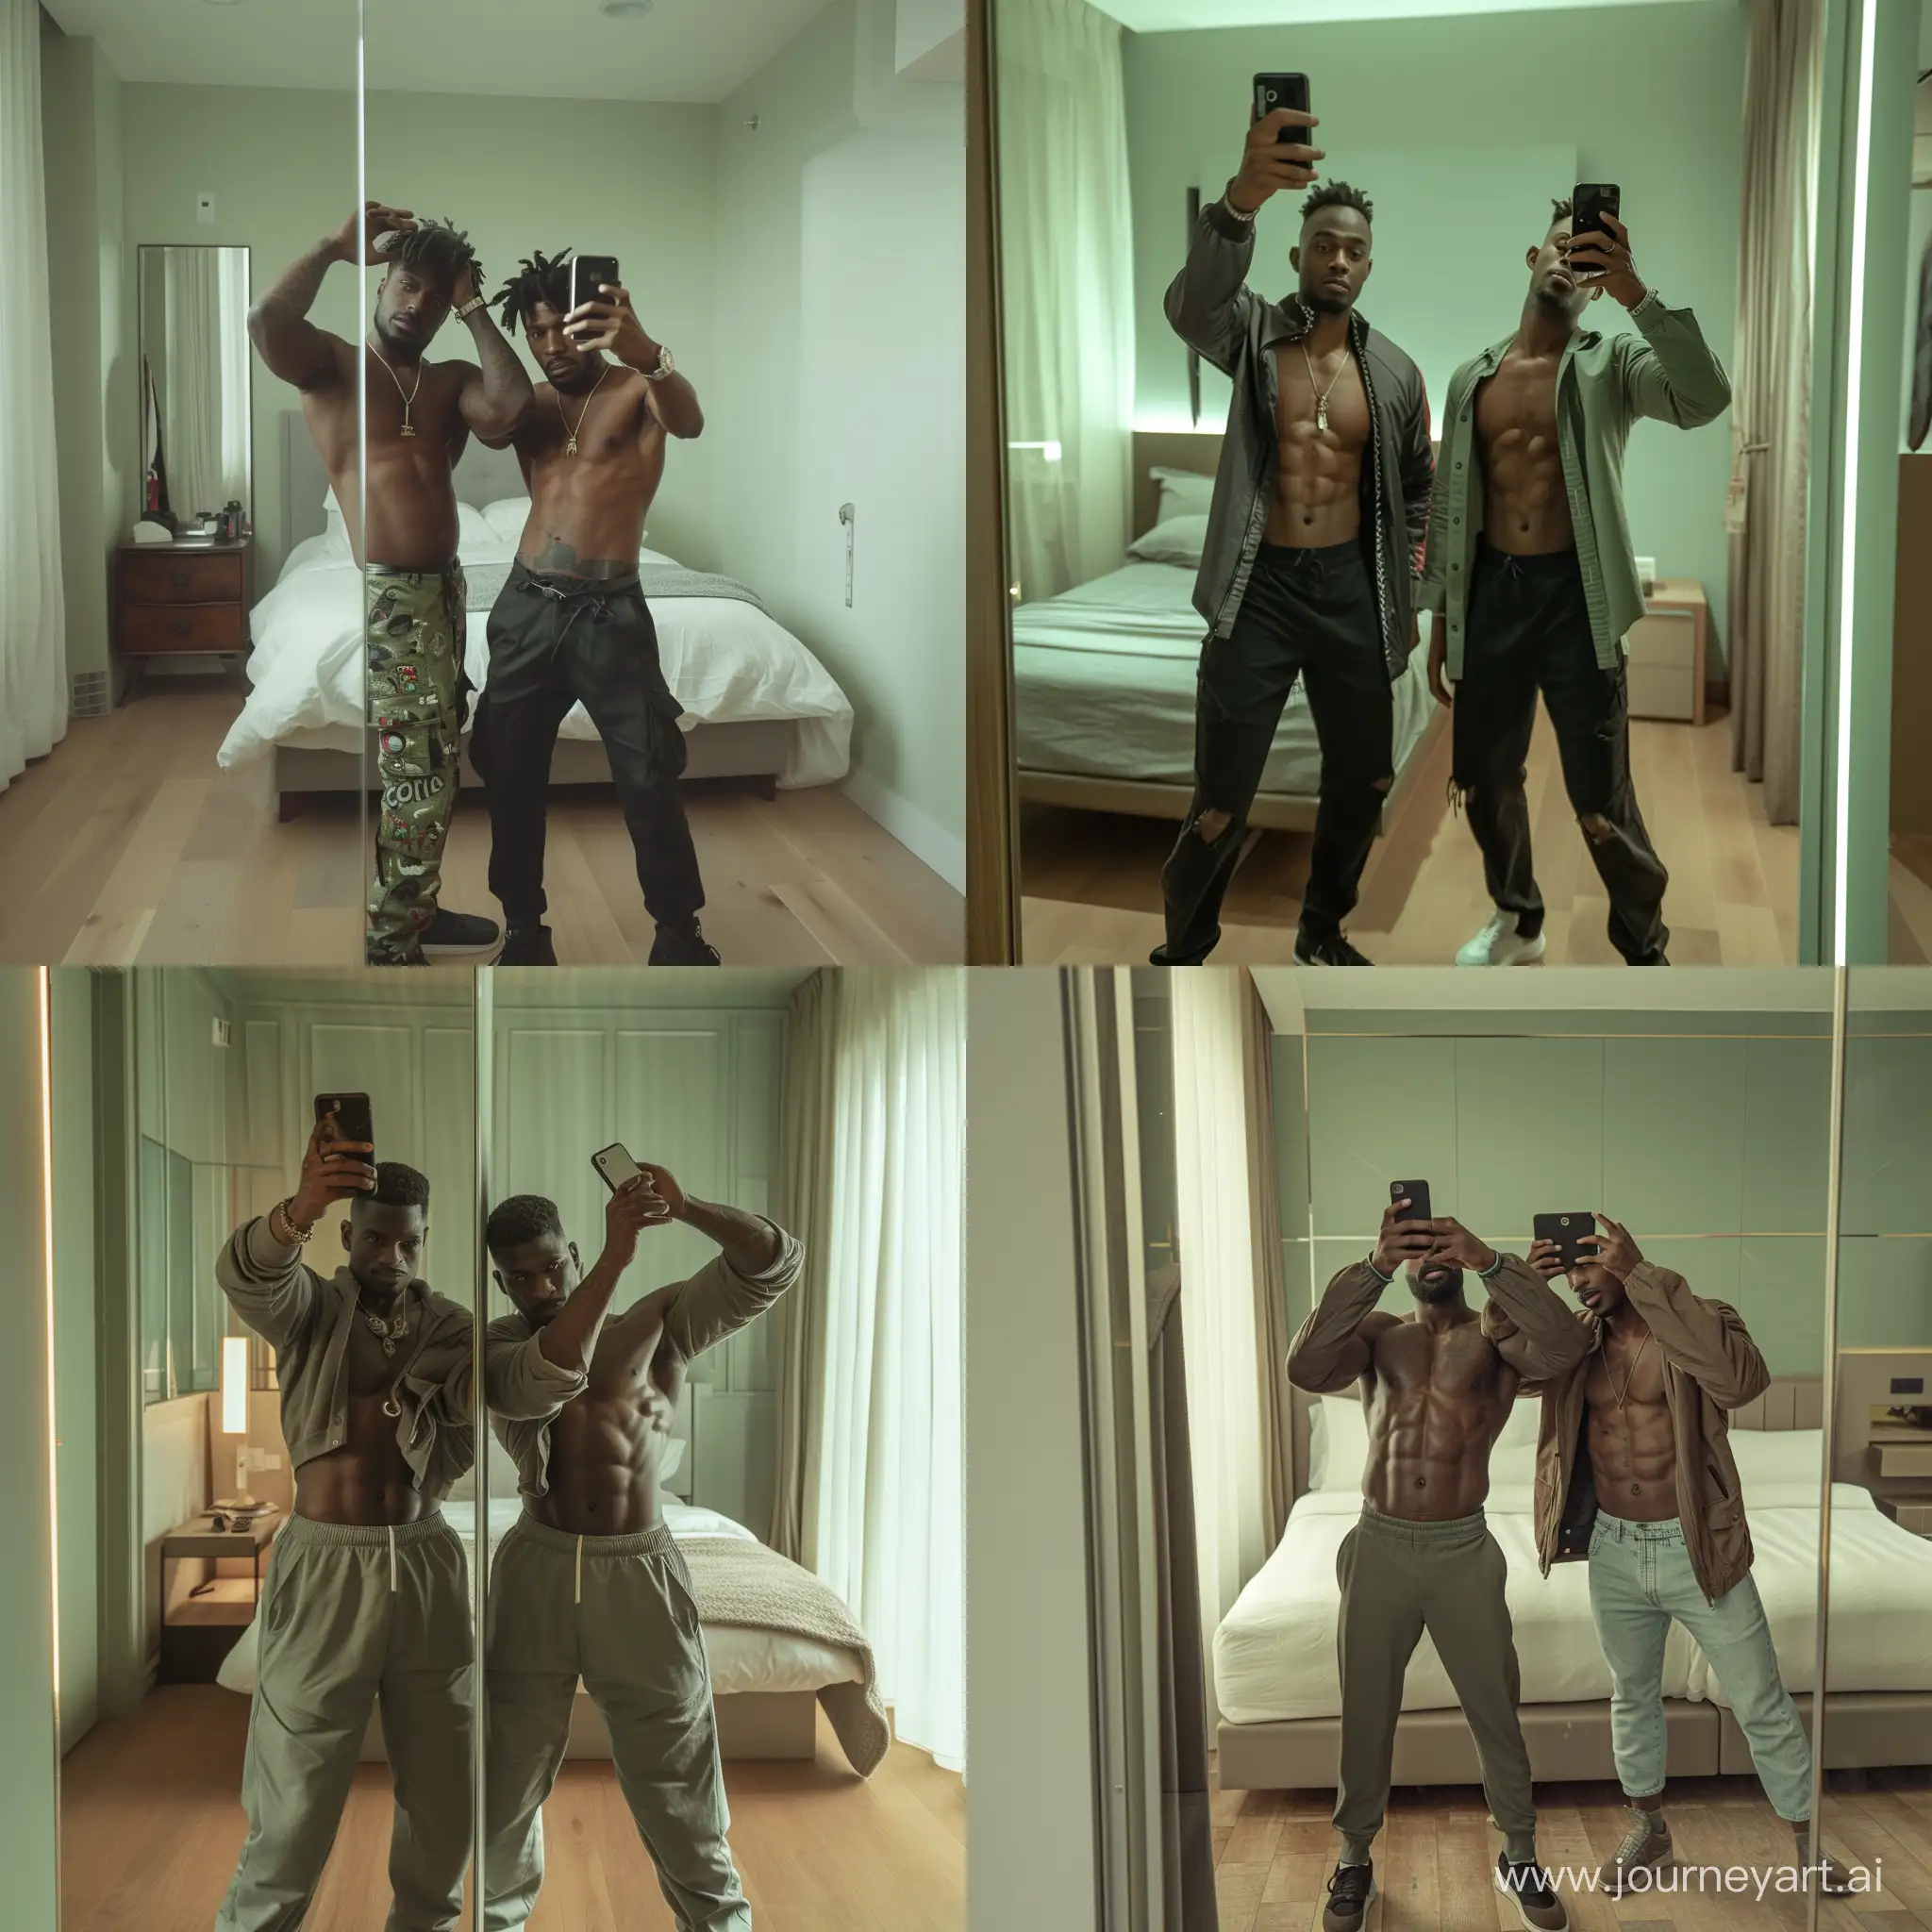 Two men in modern streetwear, one African American and one Latino, taking a mirror selfie with an iPhone in a modern bedroom. They are posing by lifting their shirts with one hand to show their abs. The bedroom has light green walls and wood floors, with a bed and nightstand. Taken with a 35mm lens on a DSLR camera, from a close perspective looking up at them posing in a full length mirror.